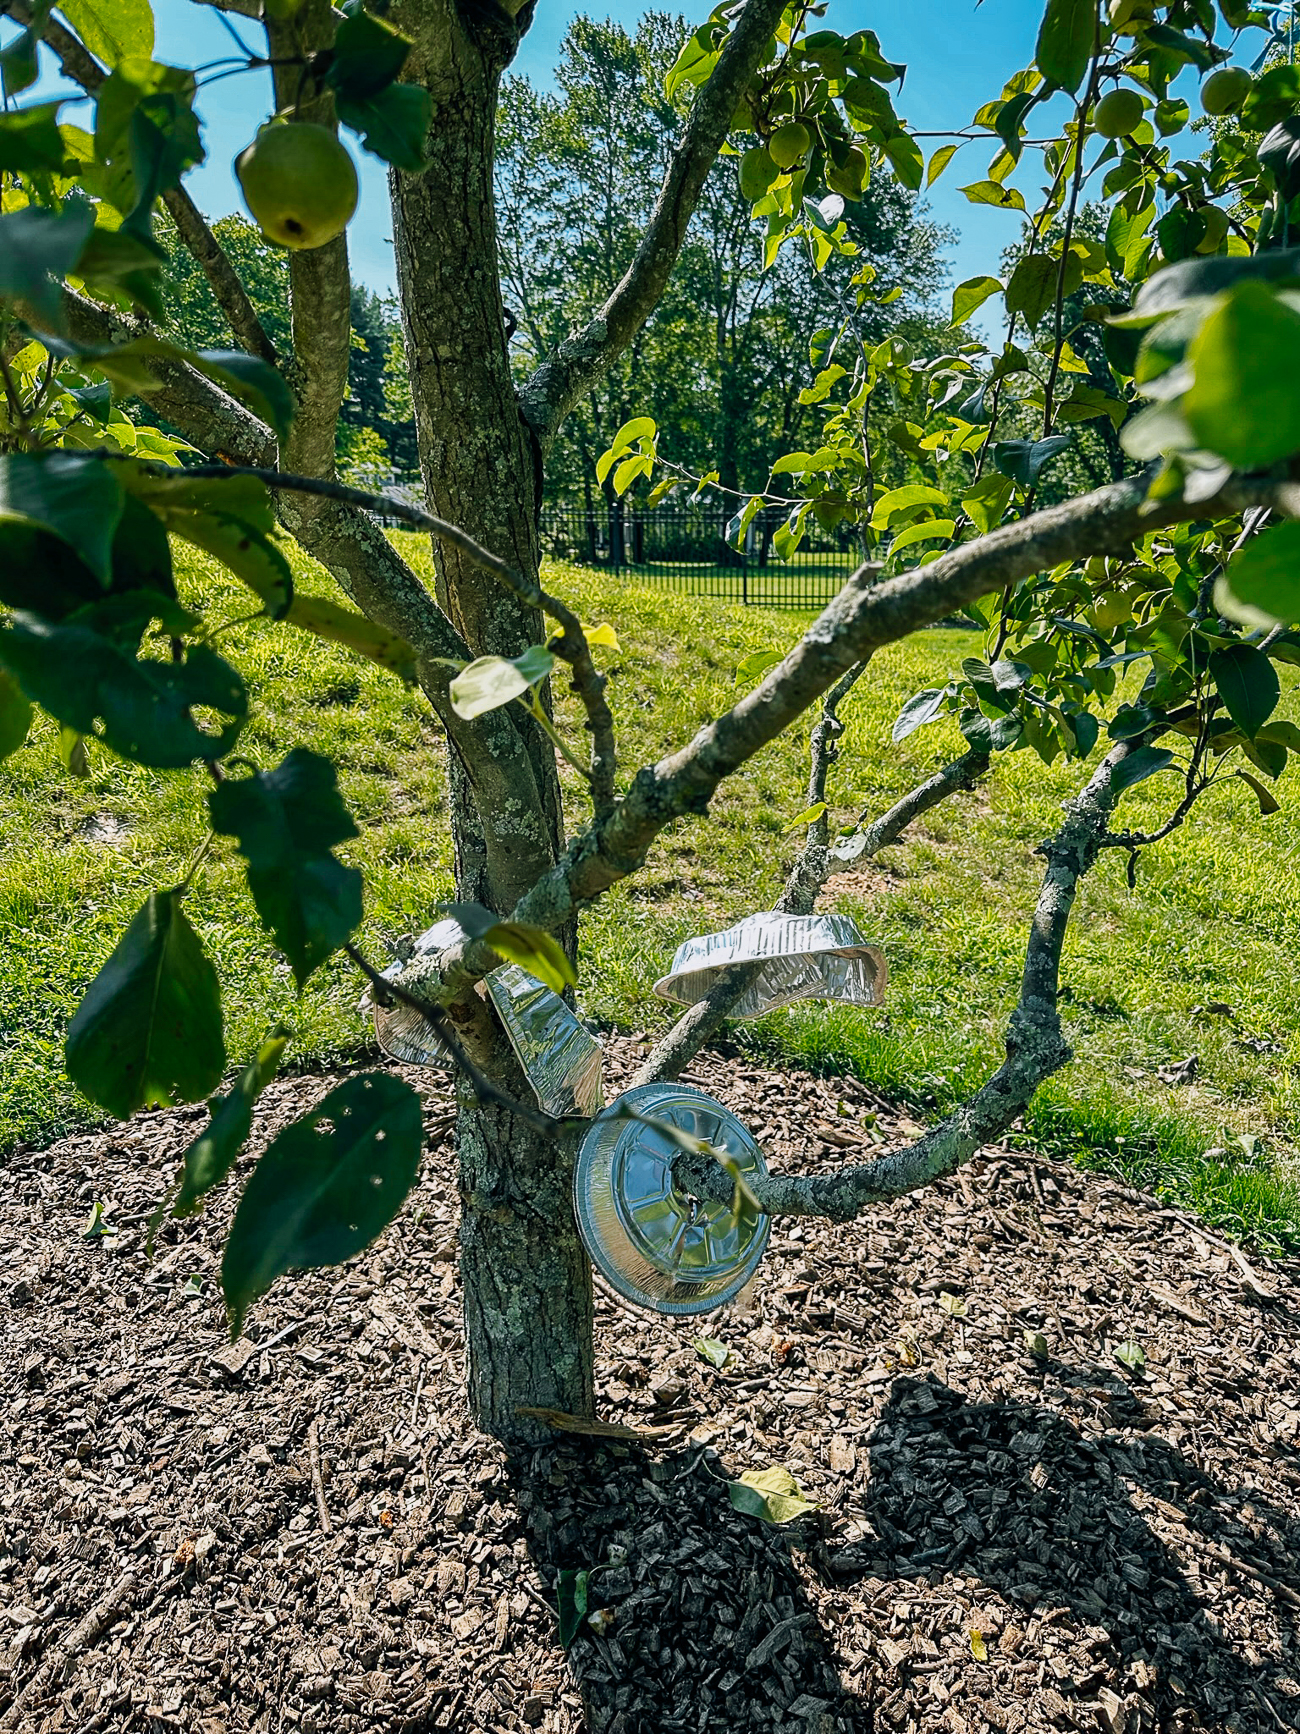 Protecting pear tree from squirrels with foil pans